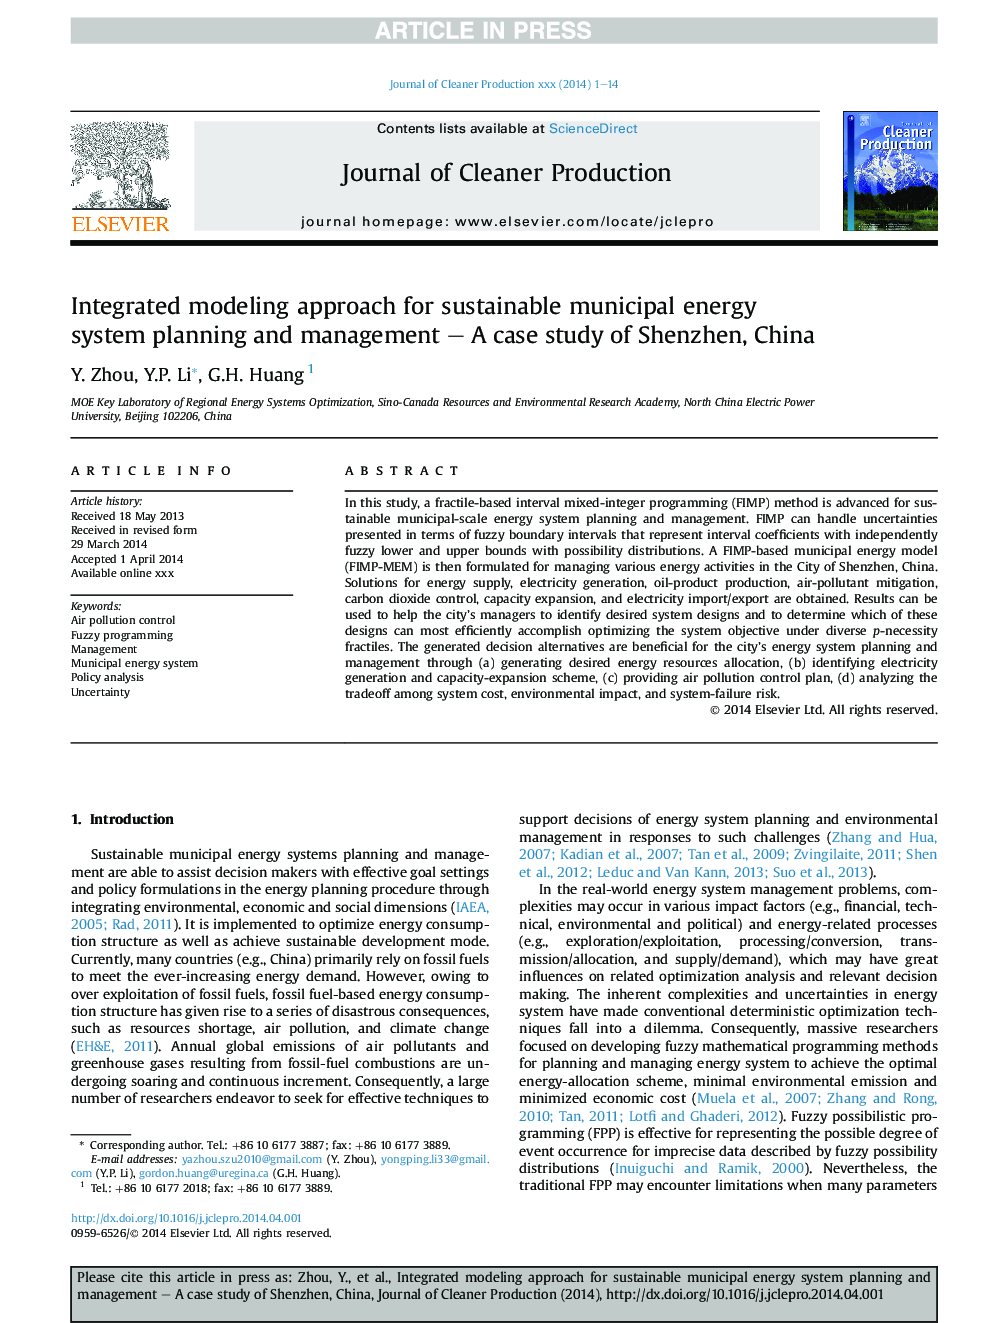 Integrated modeling approach for sustainable municipal energy system planning and management - A case study of Shenzhen, China